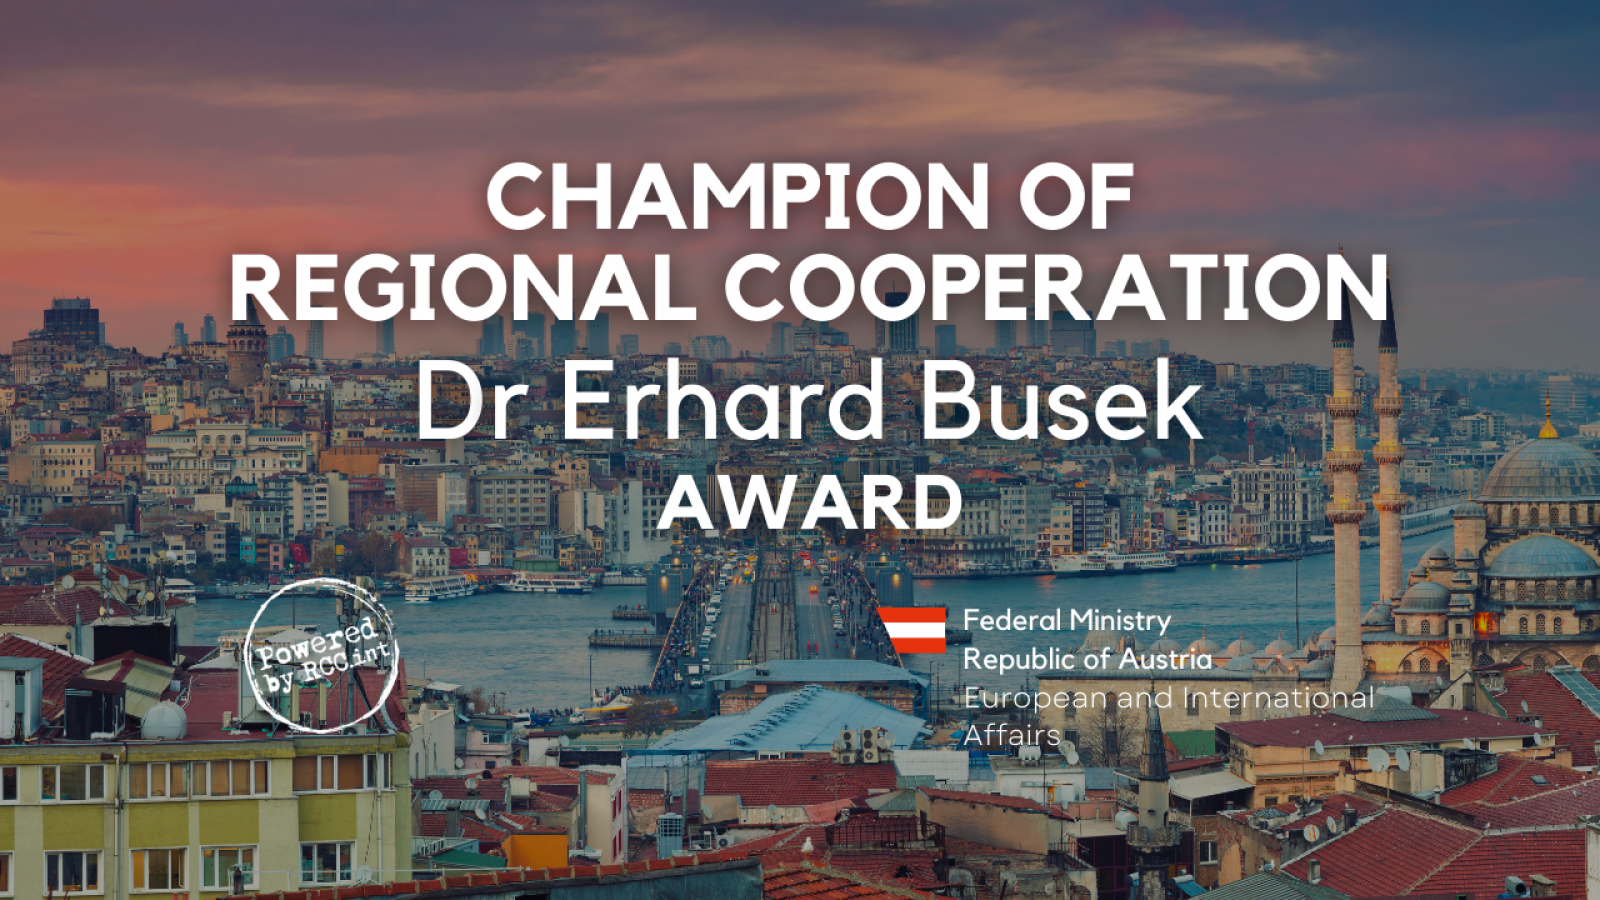 Nominations for the Champion of Regional Cooperation Dr Erhard Busek Award are open!